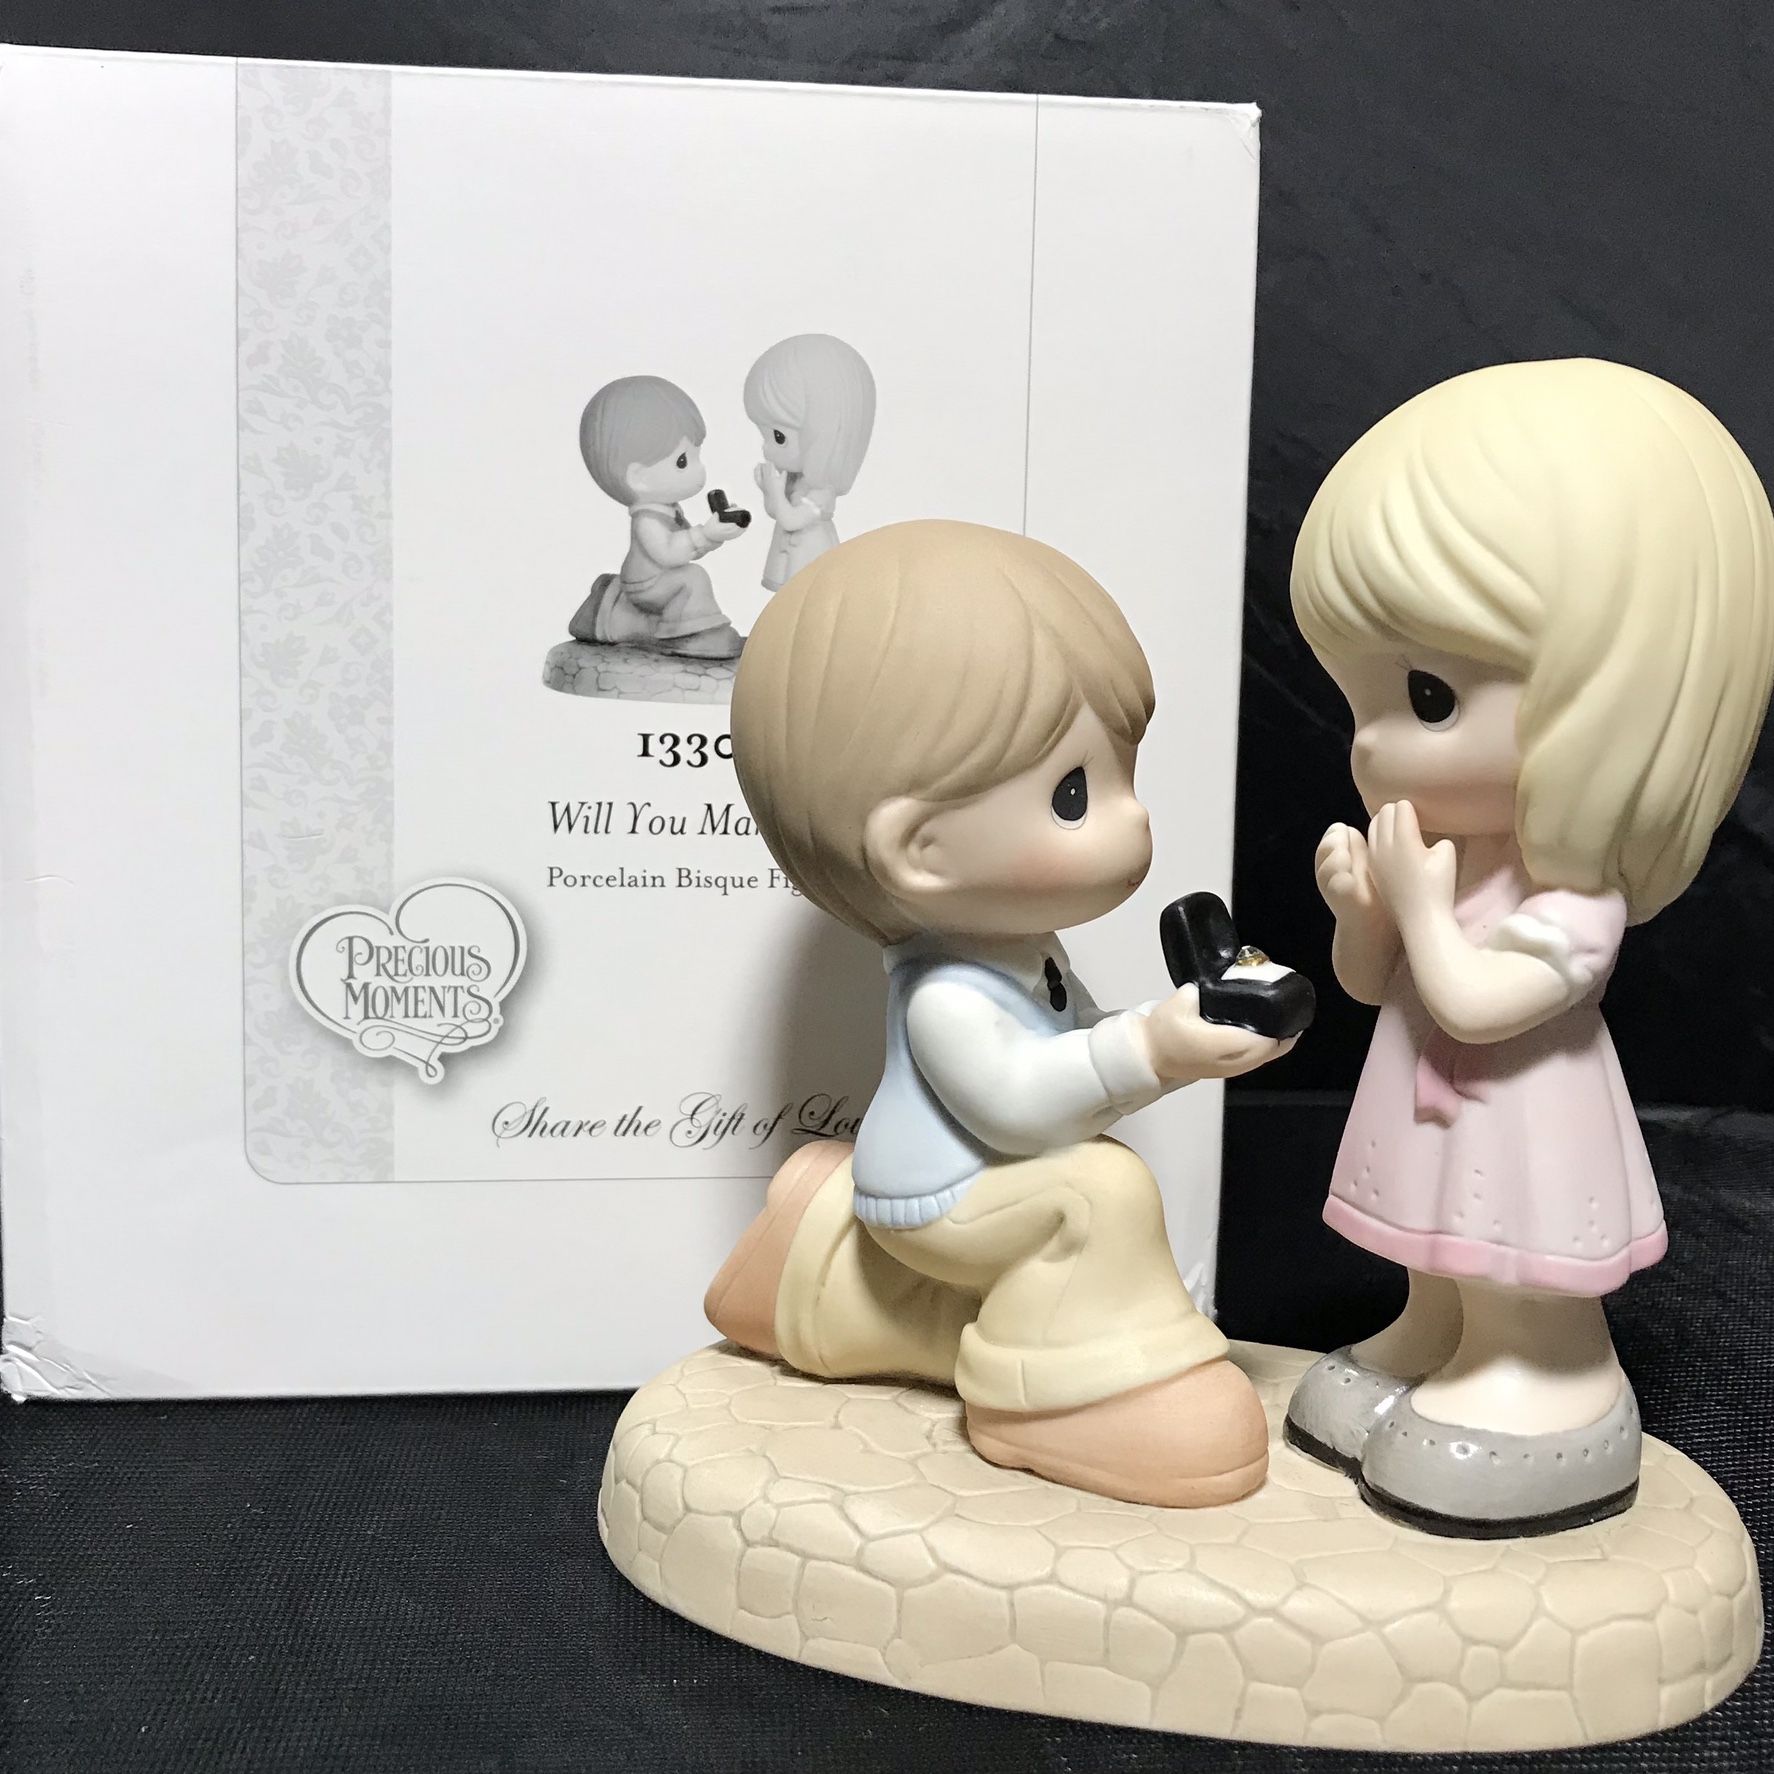 Precious Moments figurine #133022 “Will You Marry Me?”